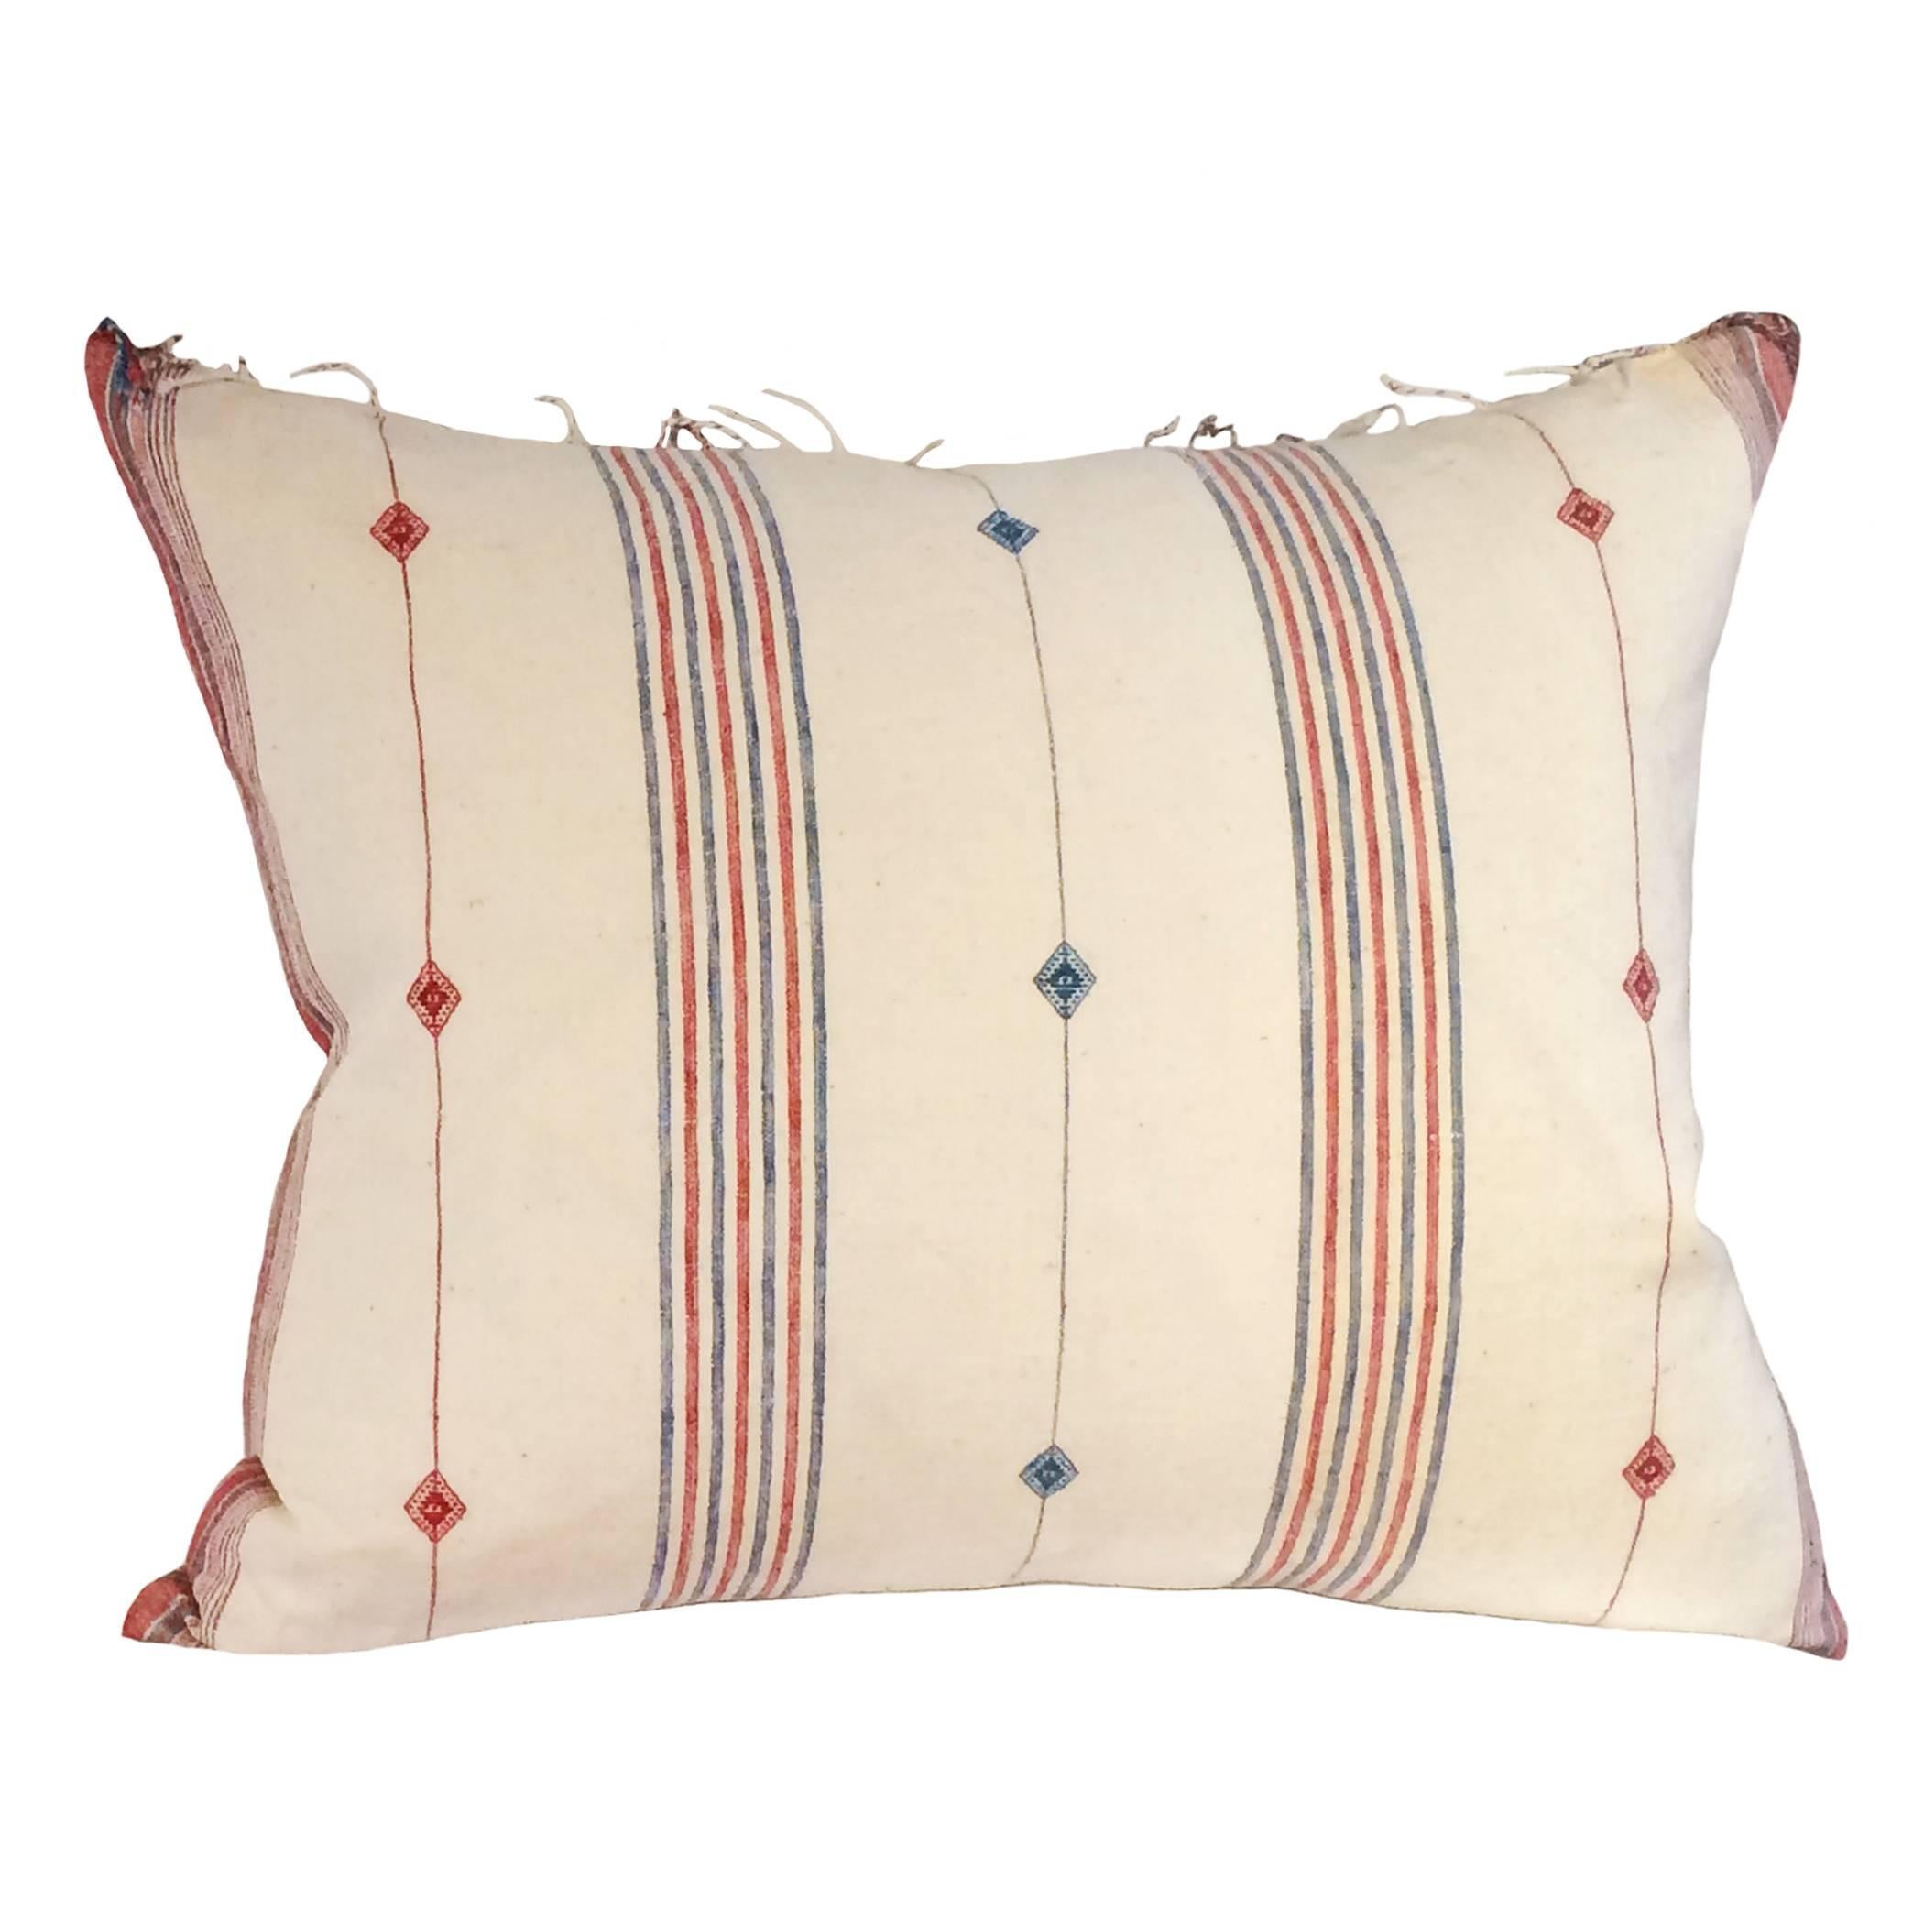 Pair of Vintage Indian Striped Down Pillows In Excellent Condition For Sale In Montecito, CA